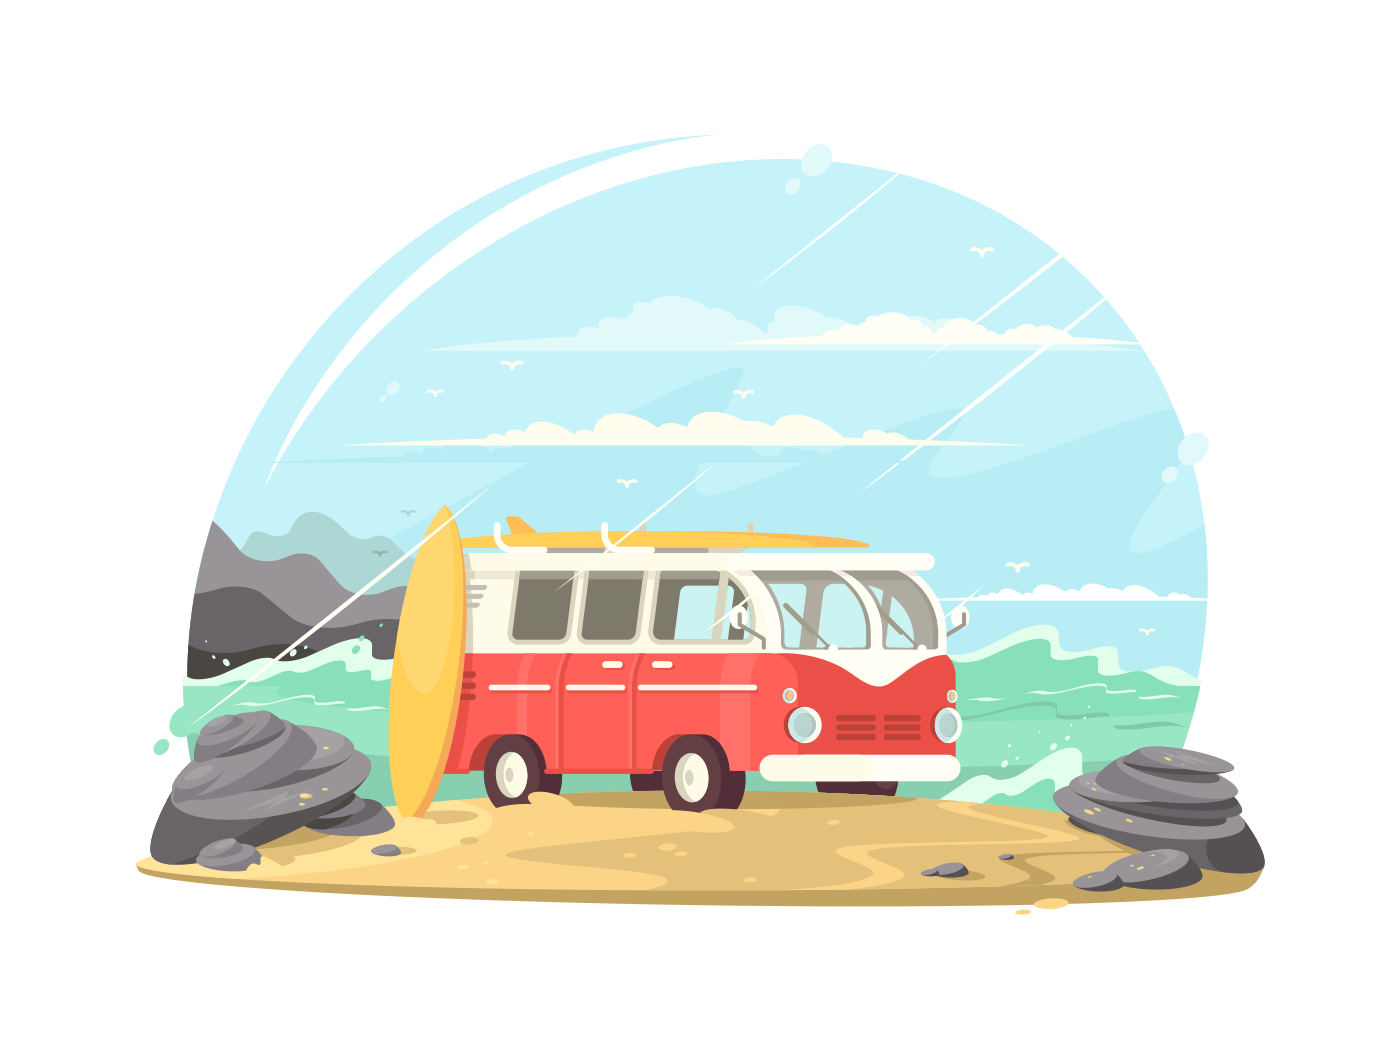 Surfing van with boards illustration